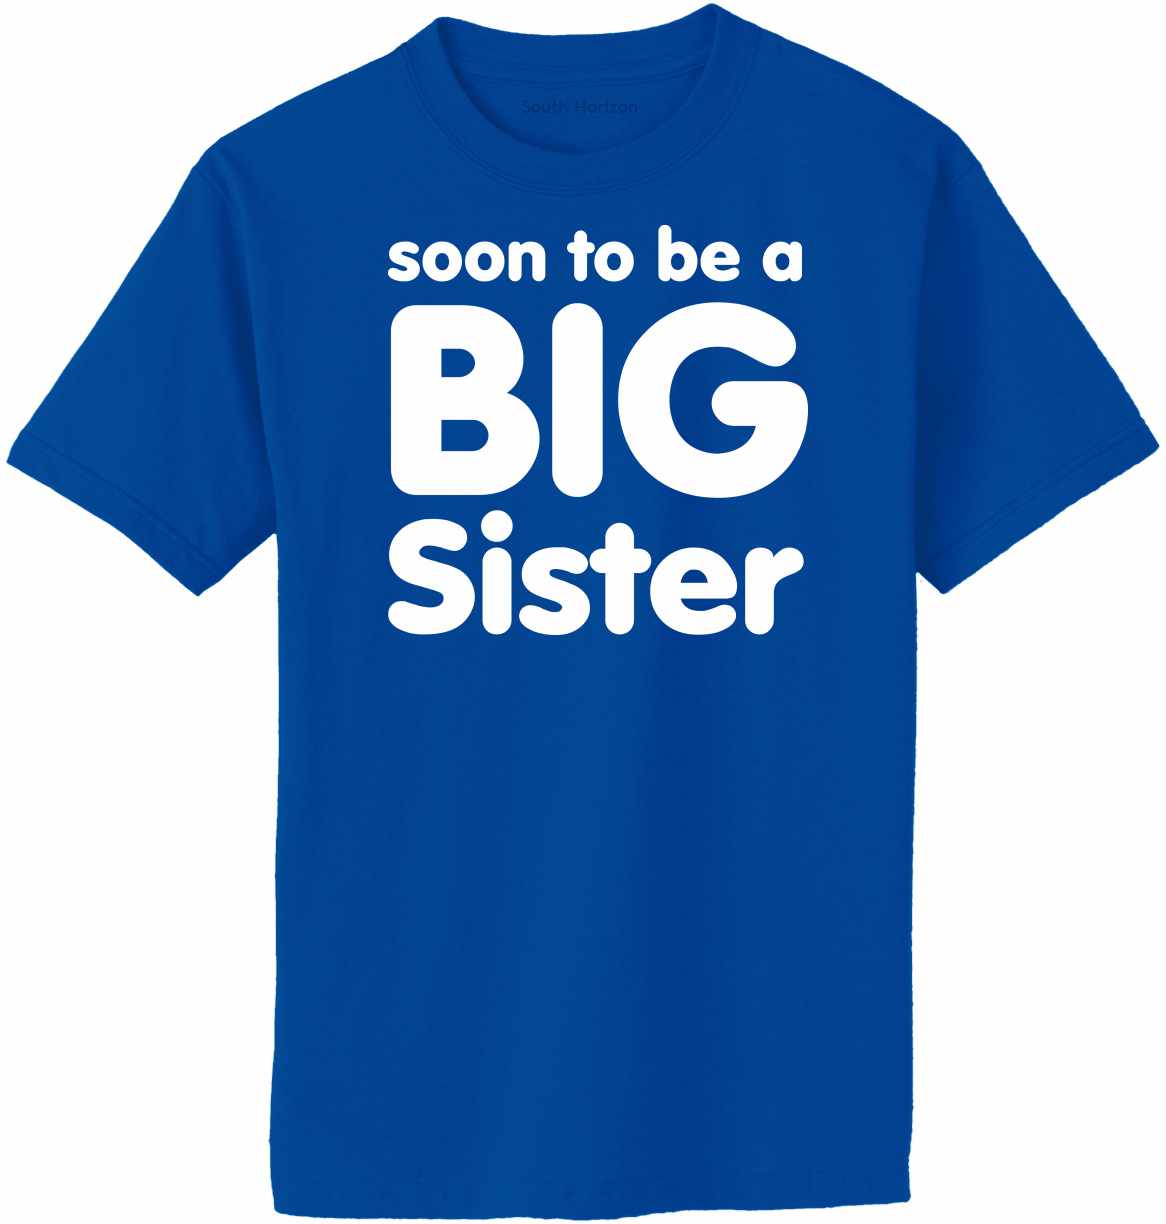 Soon to be a BIG SISTER Adult T-Shirt (#714-1)